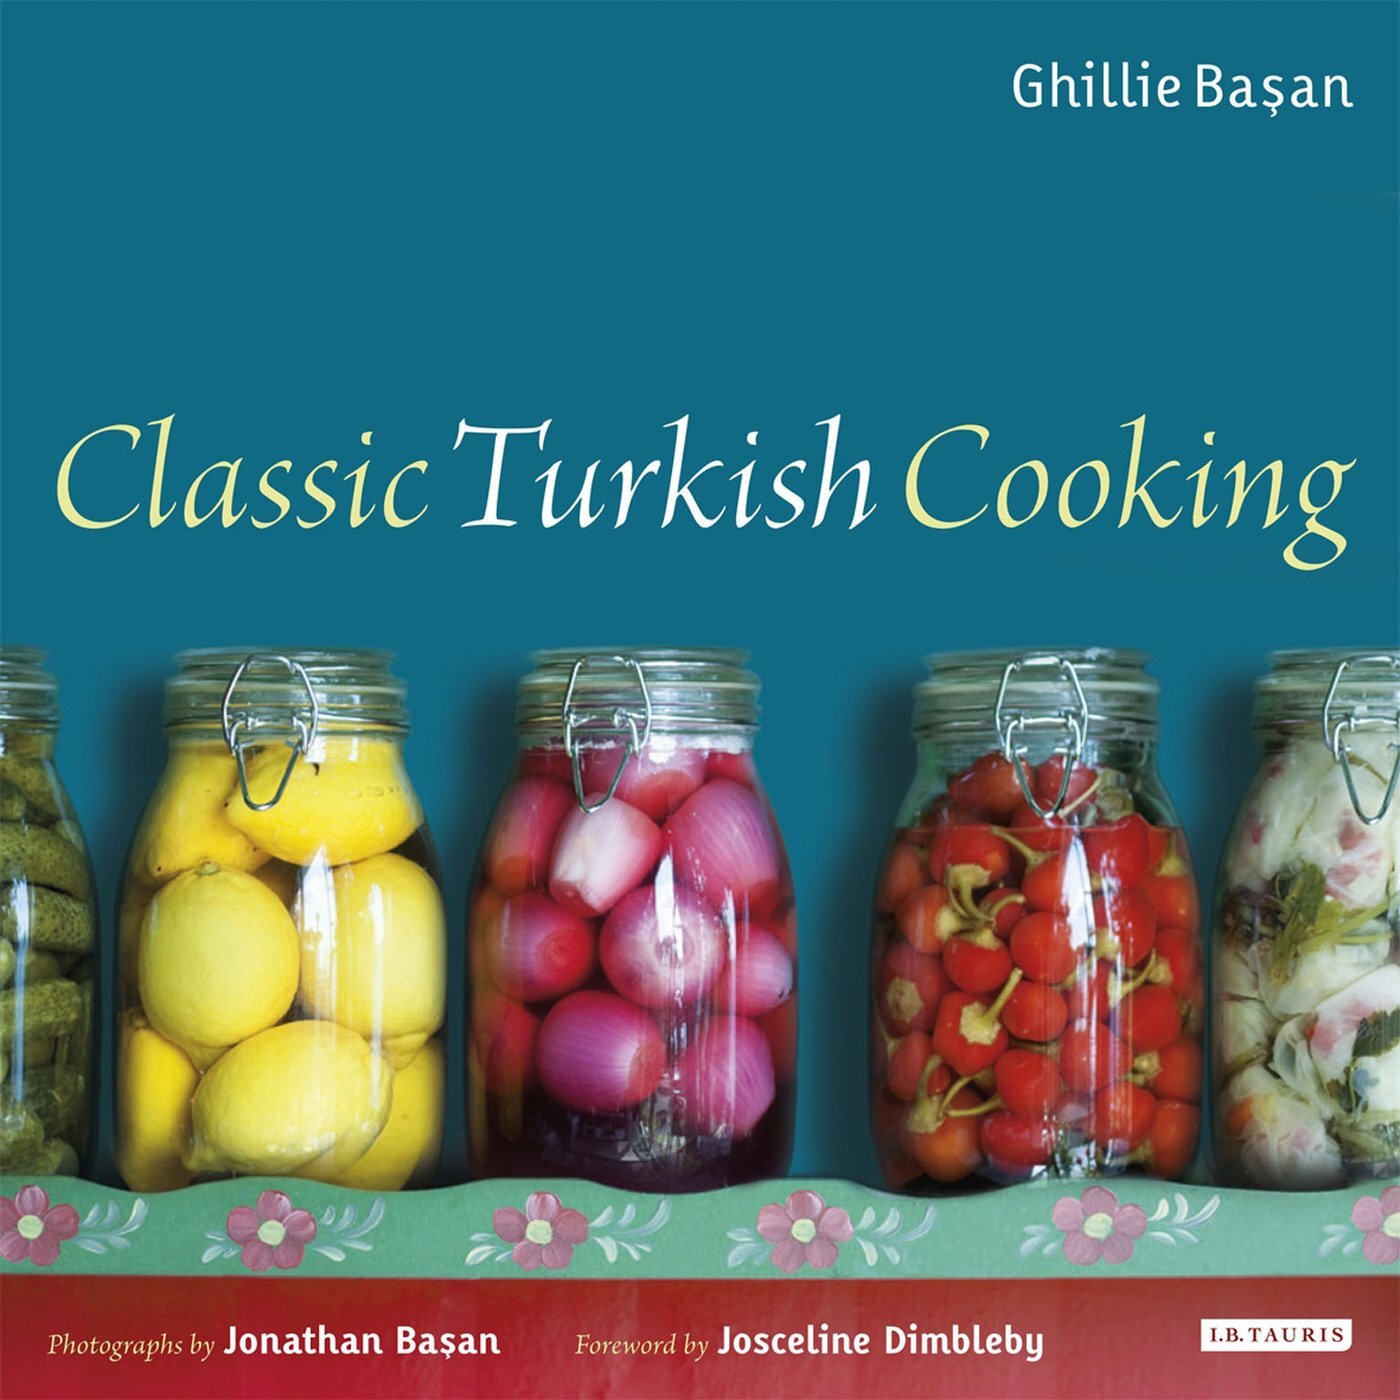 Classic Turkish Cooking by Ghillie BAsan